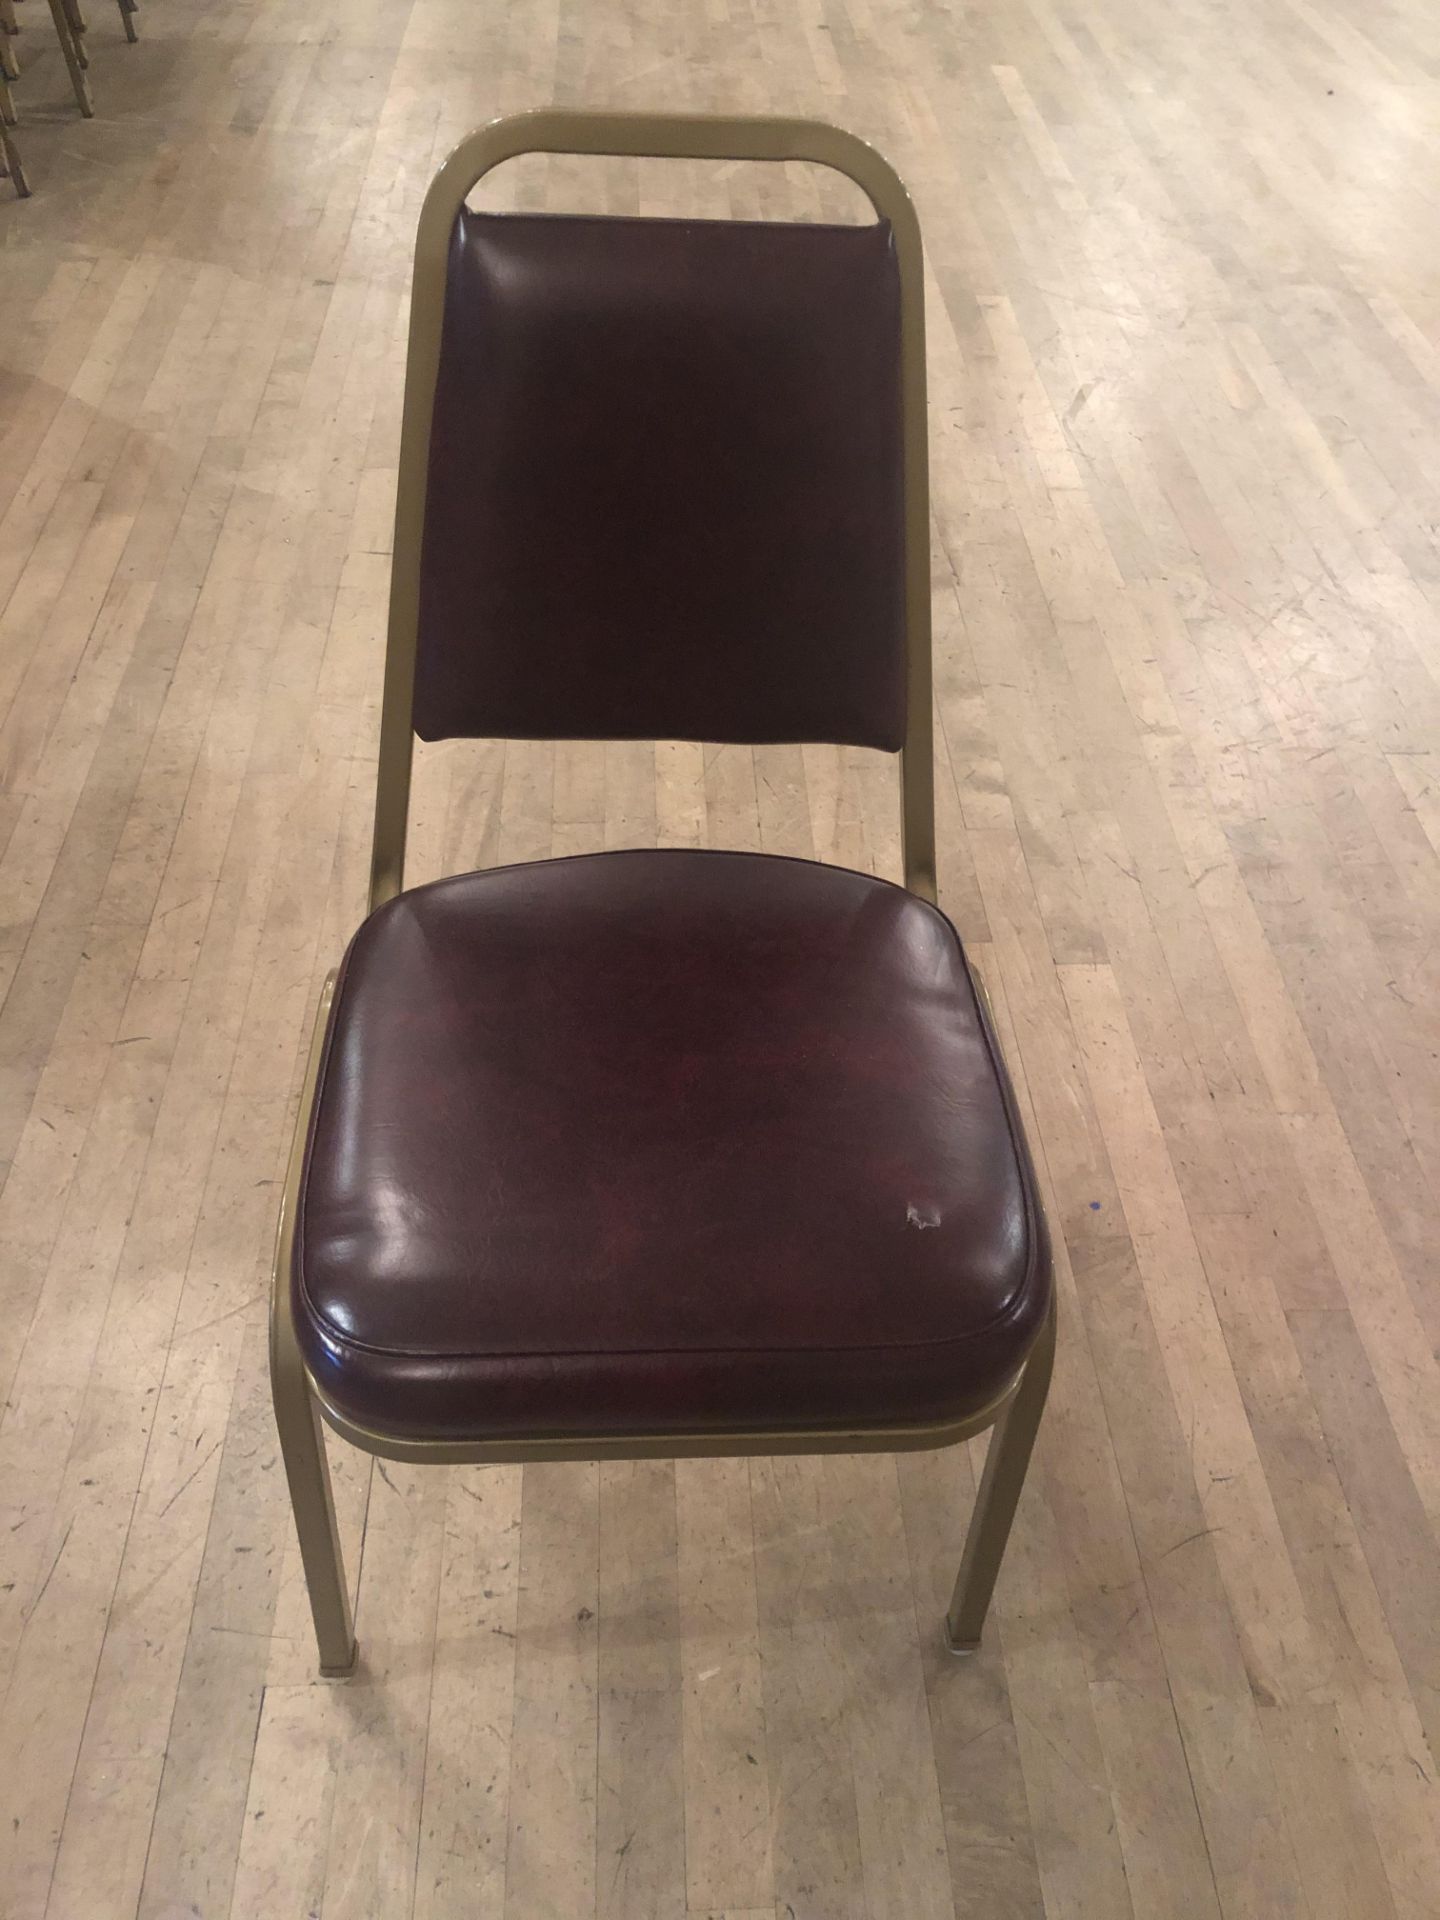 20 x Faux Leather Banquet Chairs in Maroon - Image 2 of 6